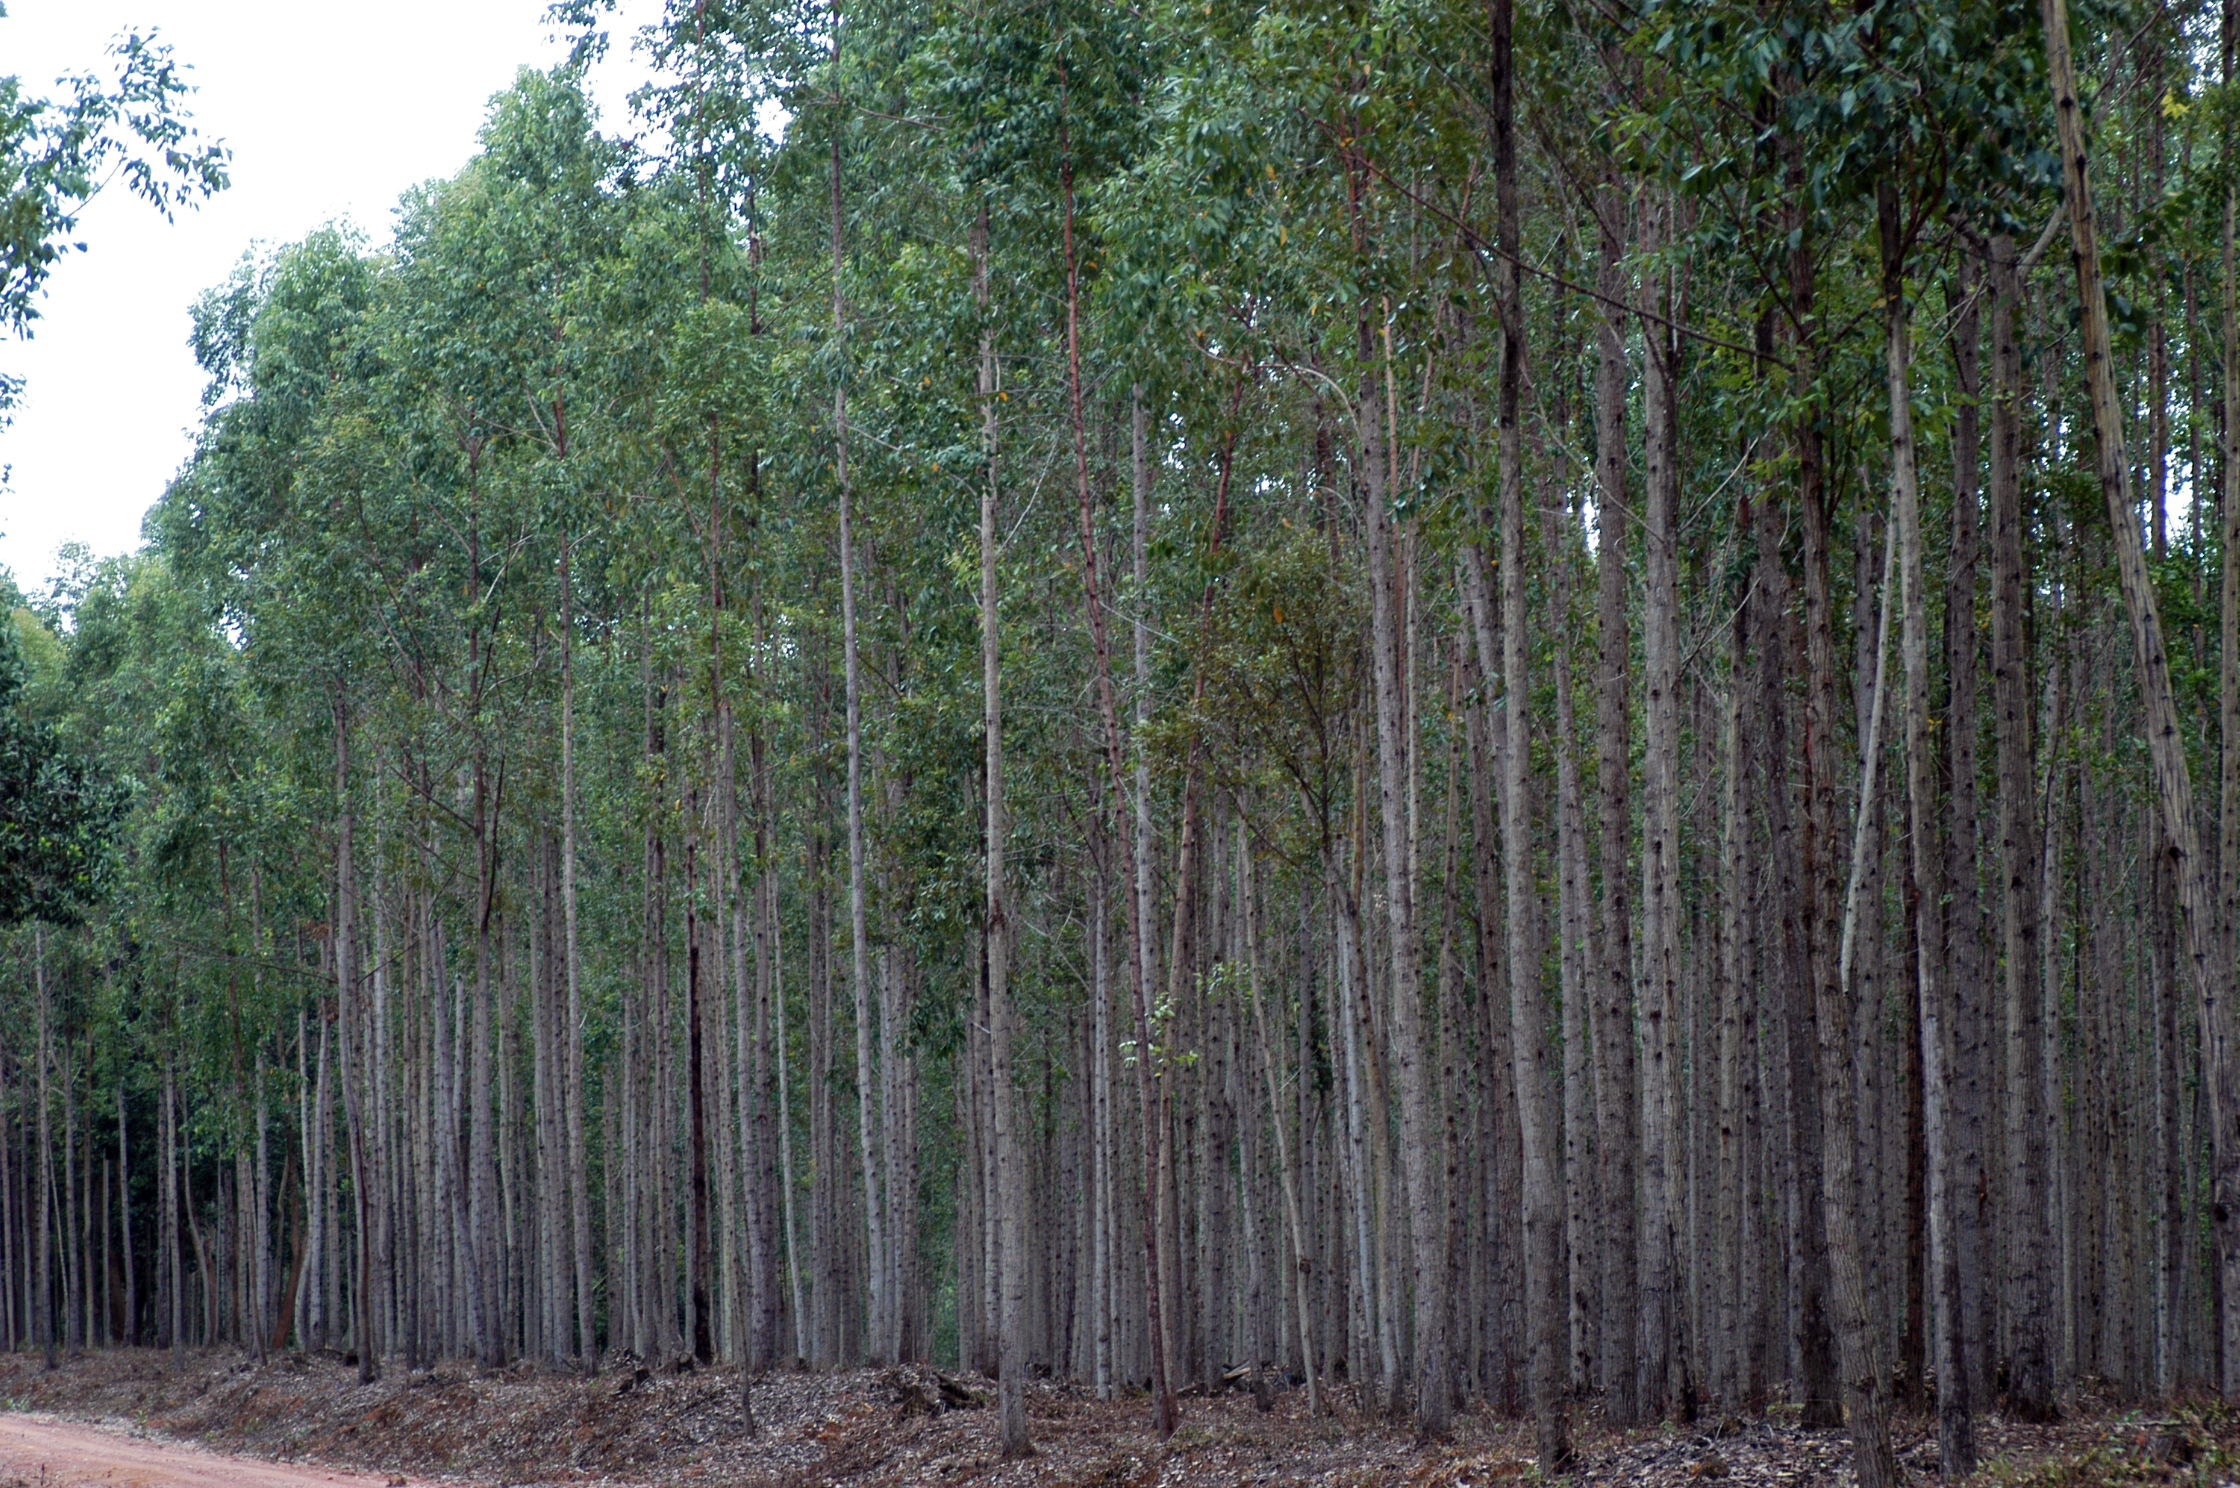 Development of overseas forest resources as the new investment outlet